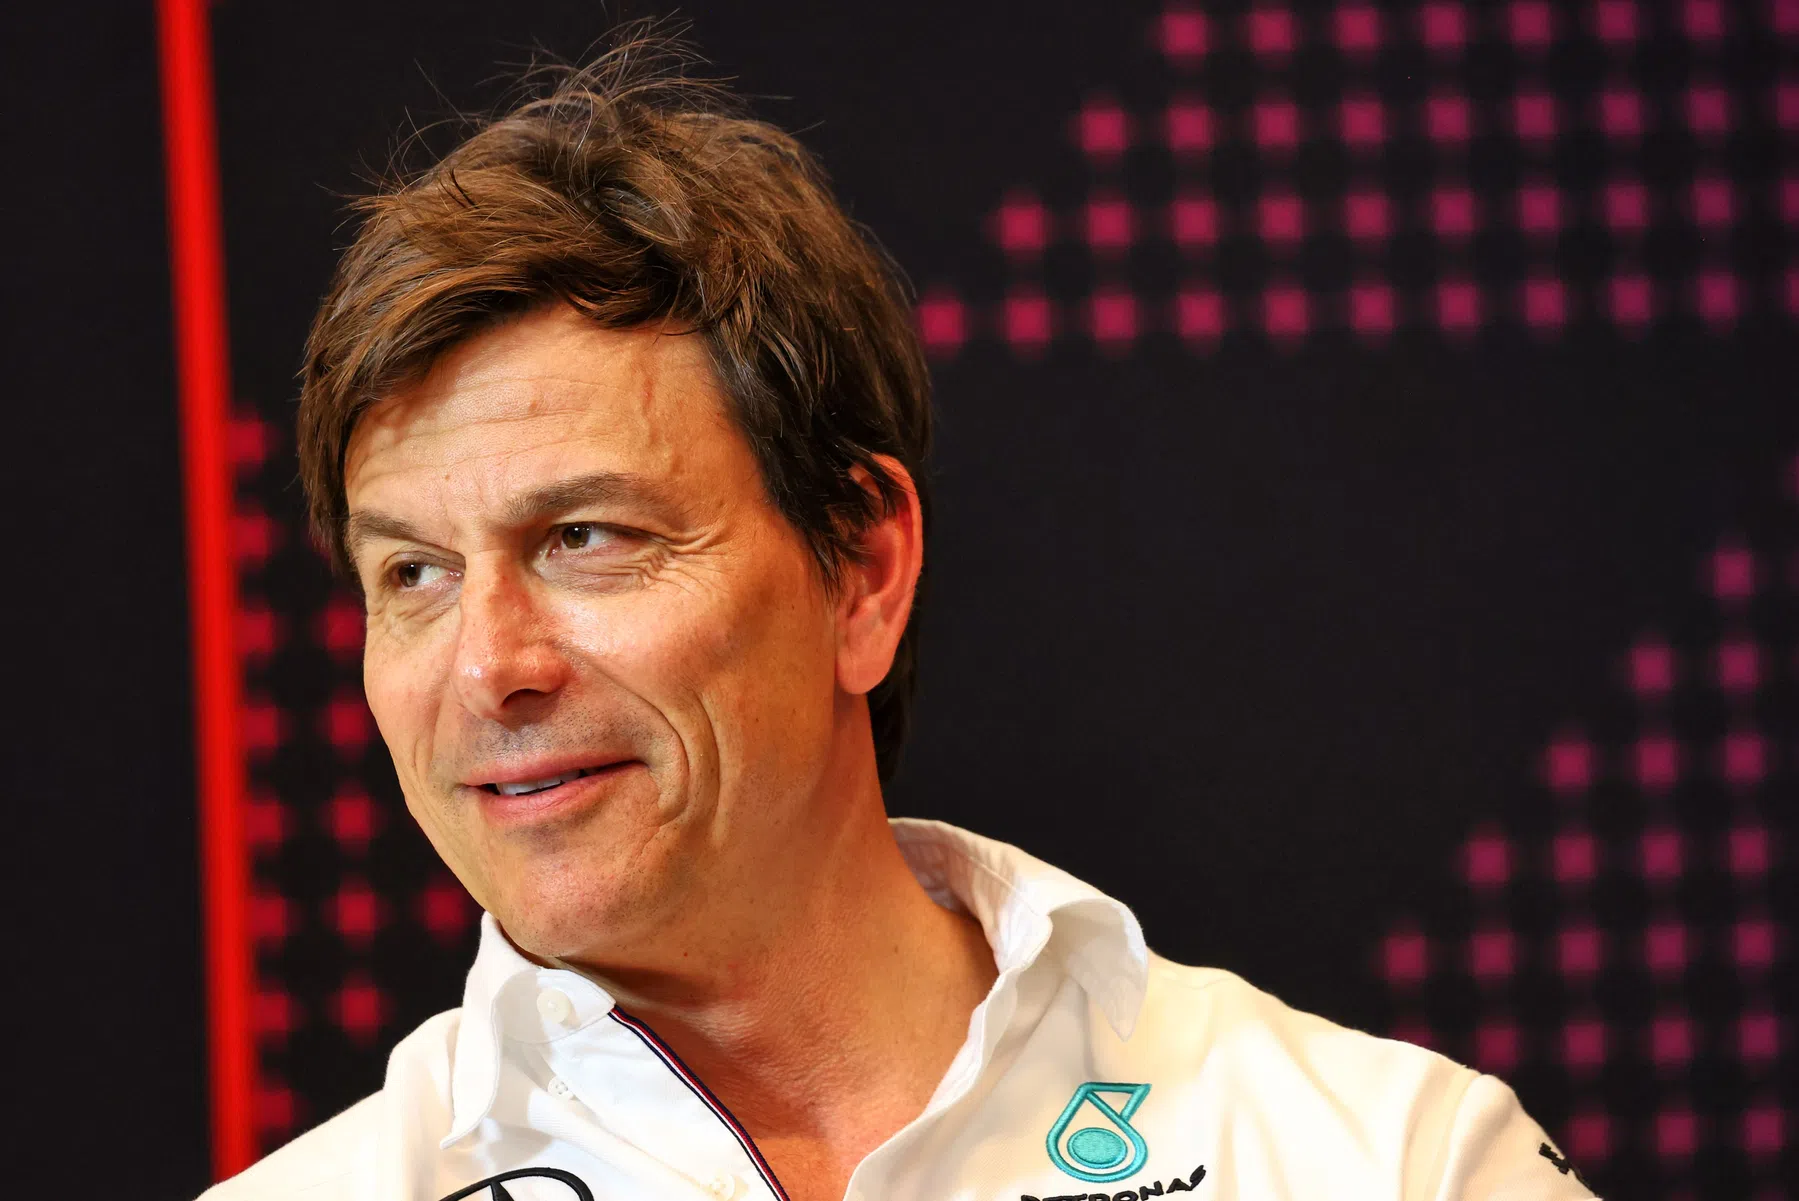 Wolff argues that Mercedes should have been ranked 1 and 2